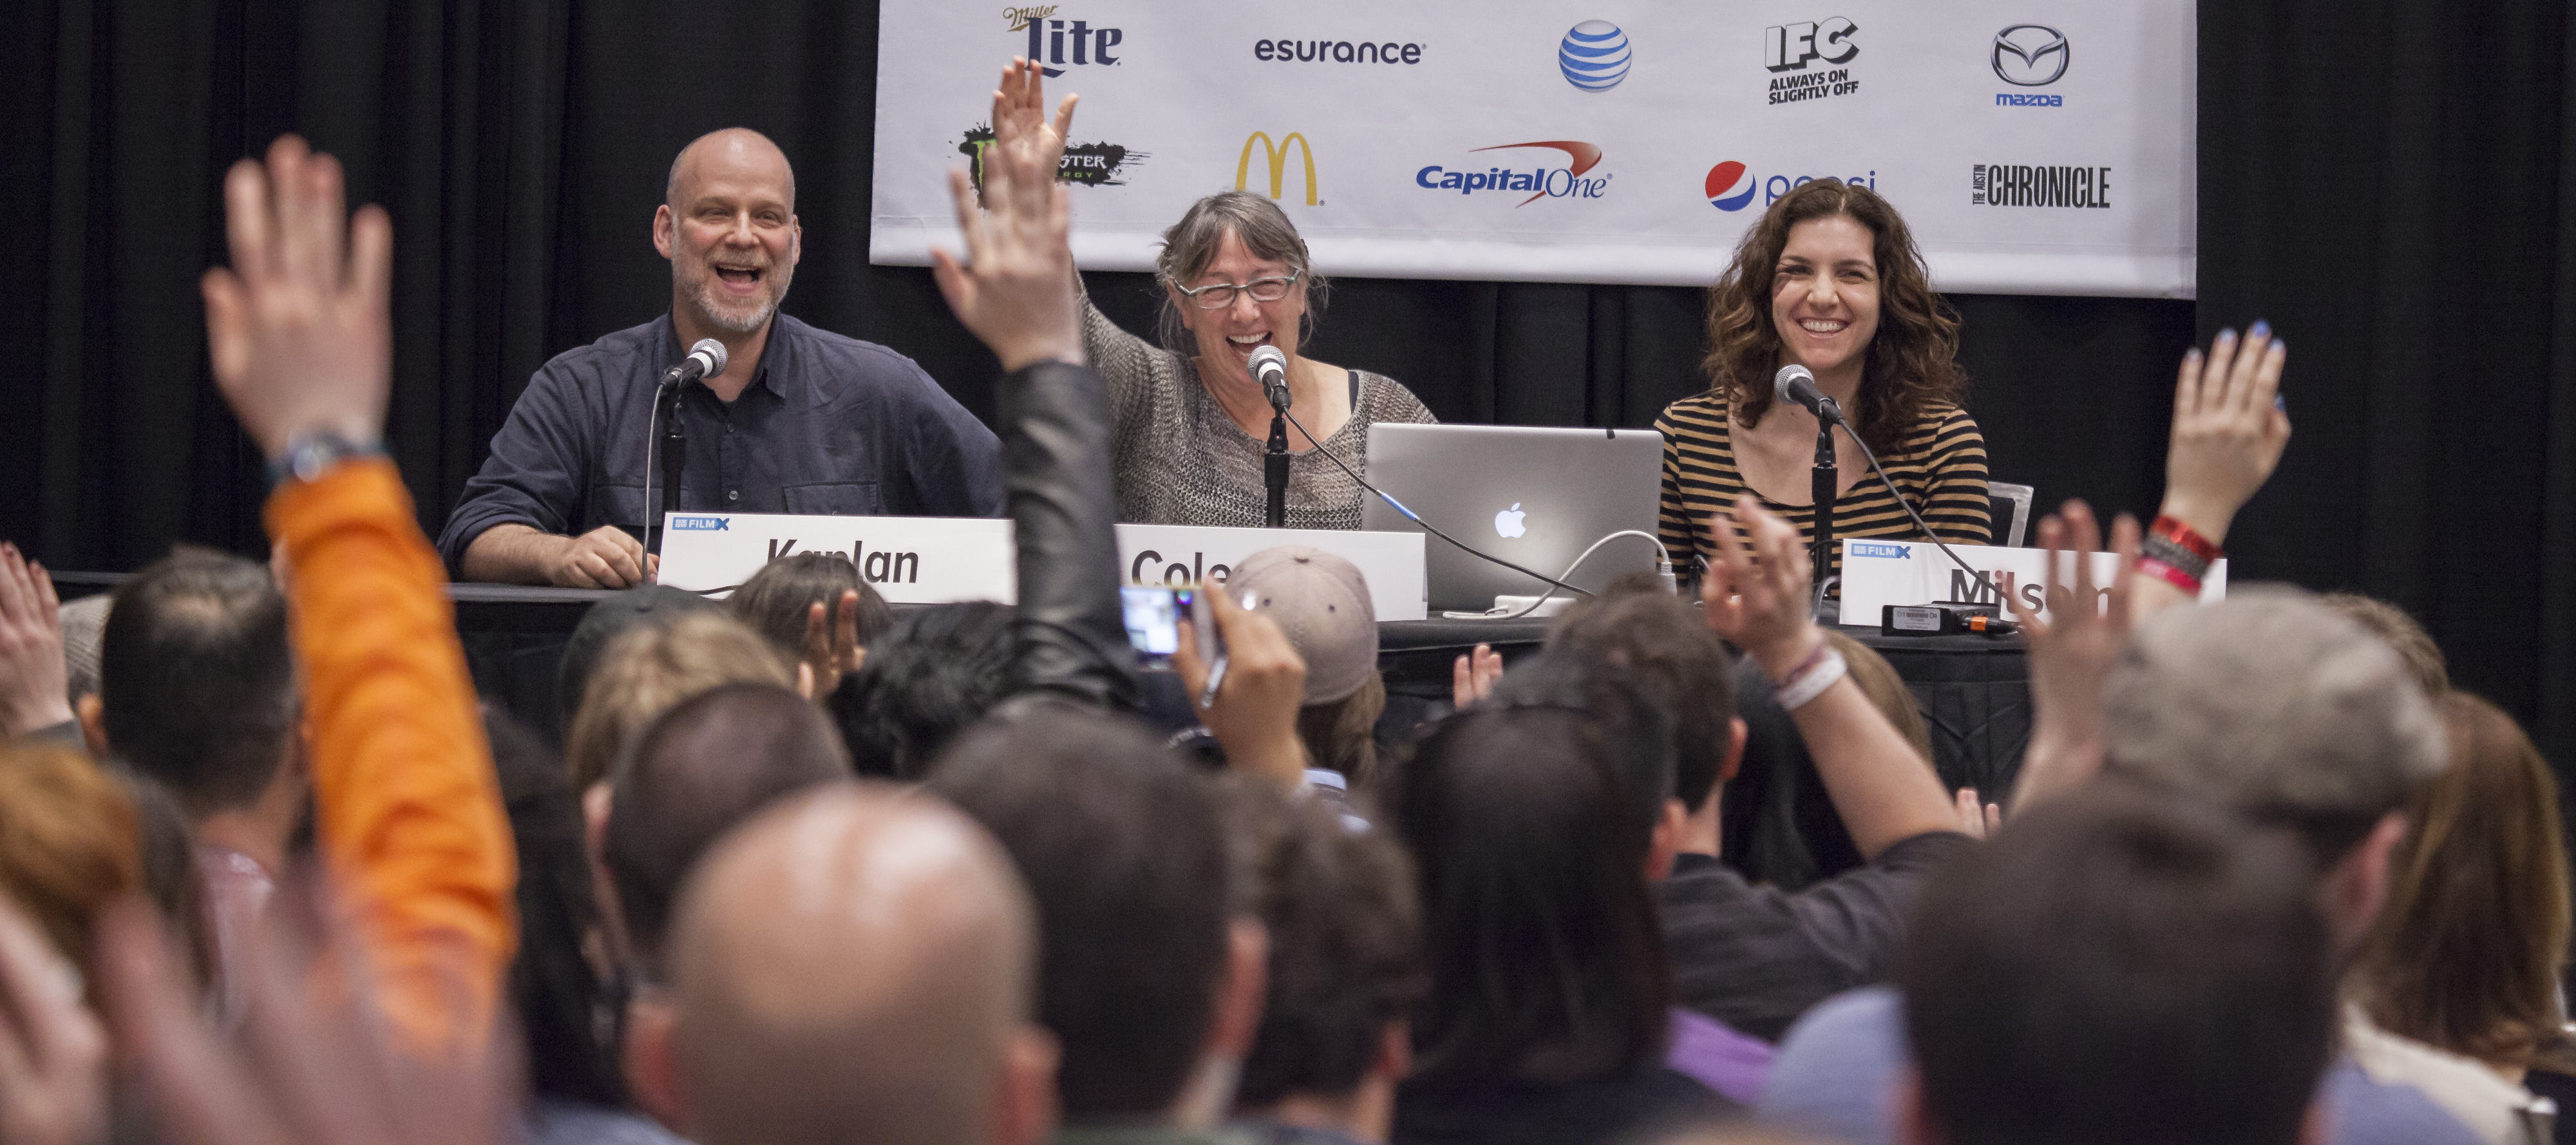 Audience at SXSW Conference session 2015. Photo by Sam Burkardt